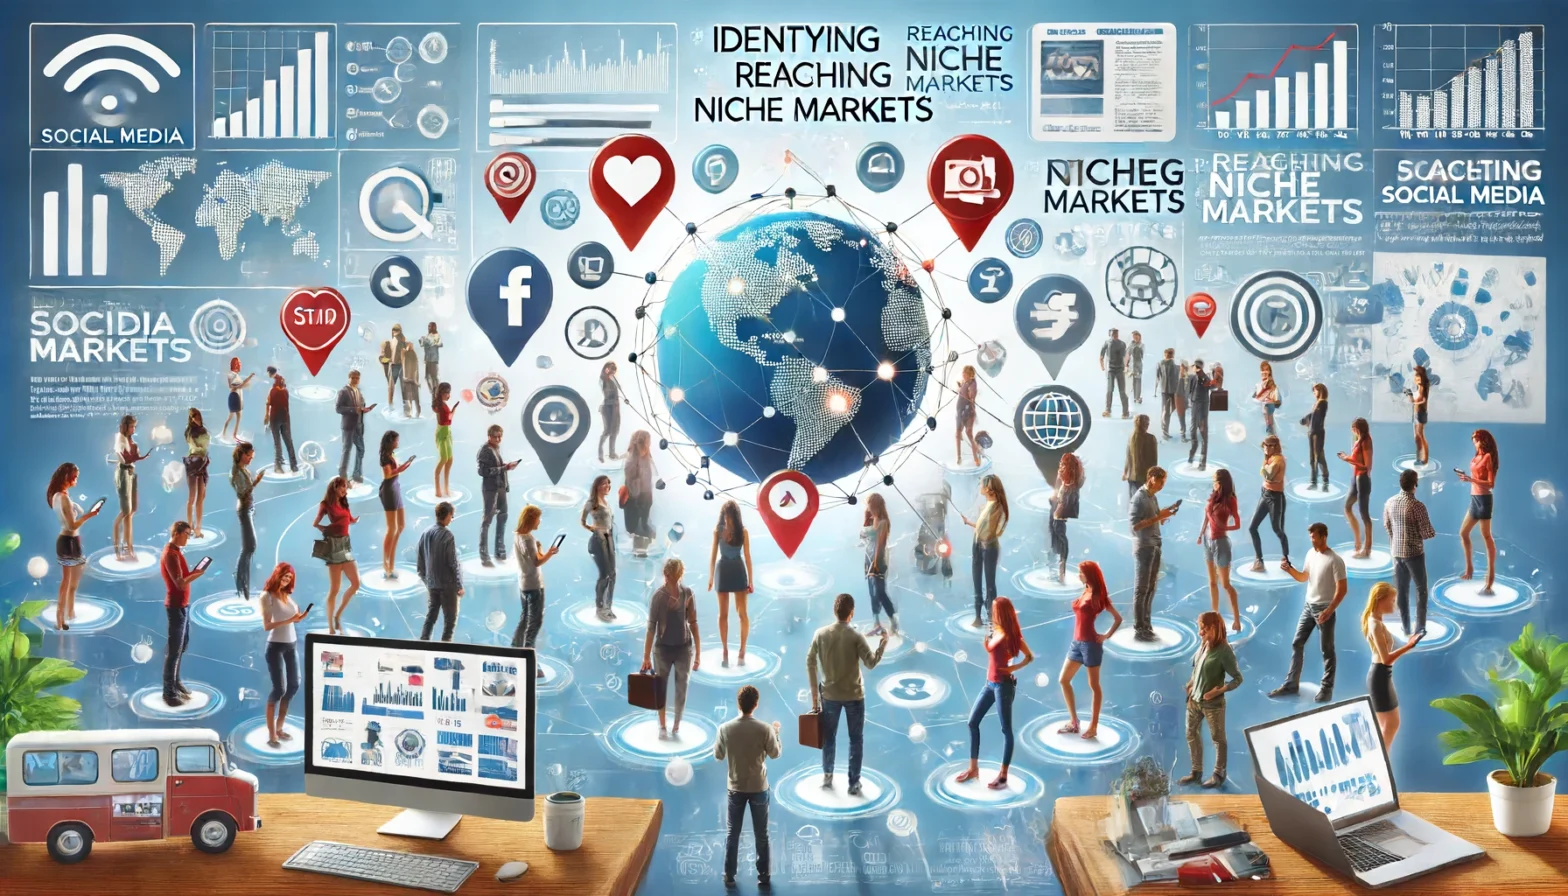 A diverse group of people using various social media platforms, surrounded by icons representing fitness, travel, fashion, technology, and food niches, with analytics charts in the background.